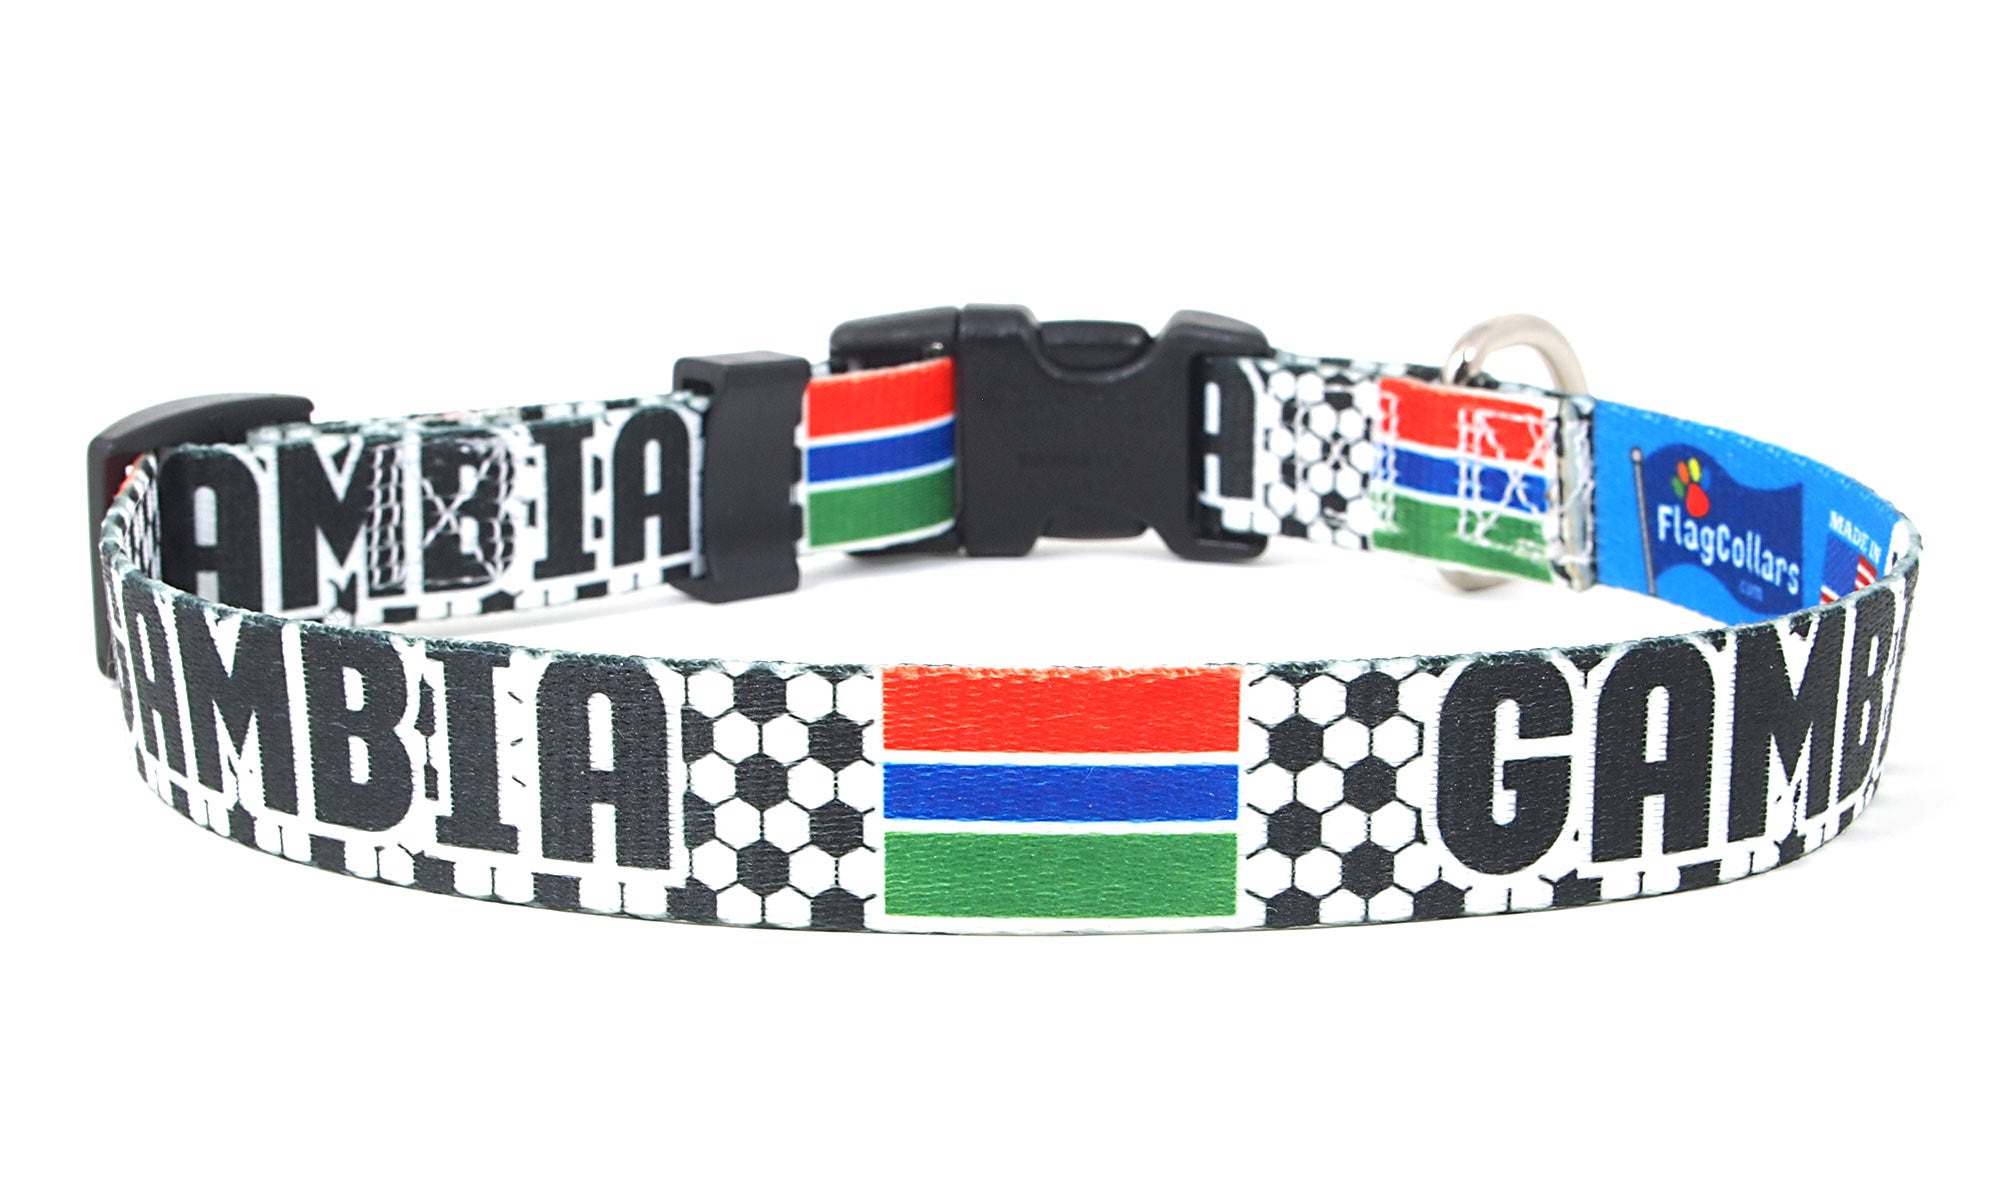 Gambia Dog Collar for Soccer Fans | Black or Pink | Quick-Release or Martingale Style | Made in NJ, USA